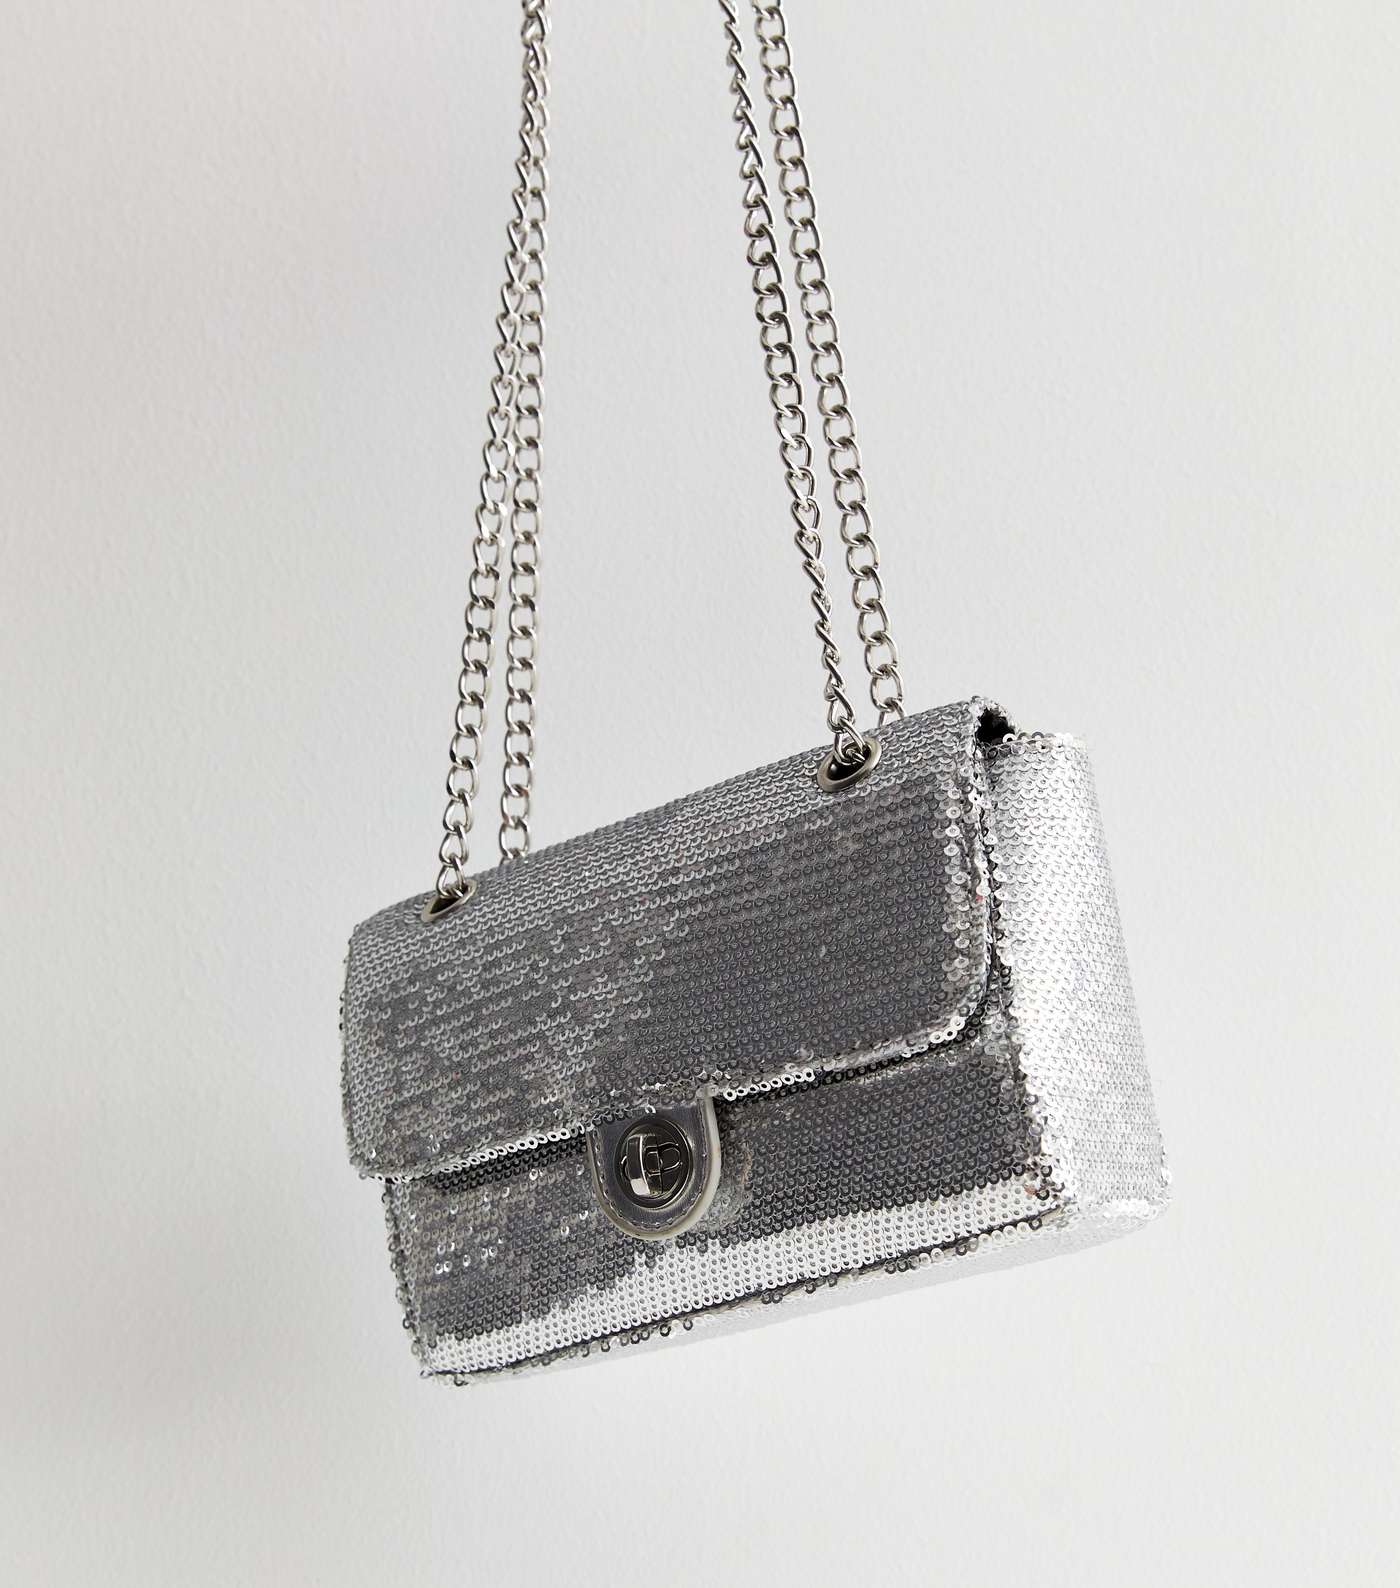 Silver Sequin Chain Cross Body Bag Image 3